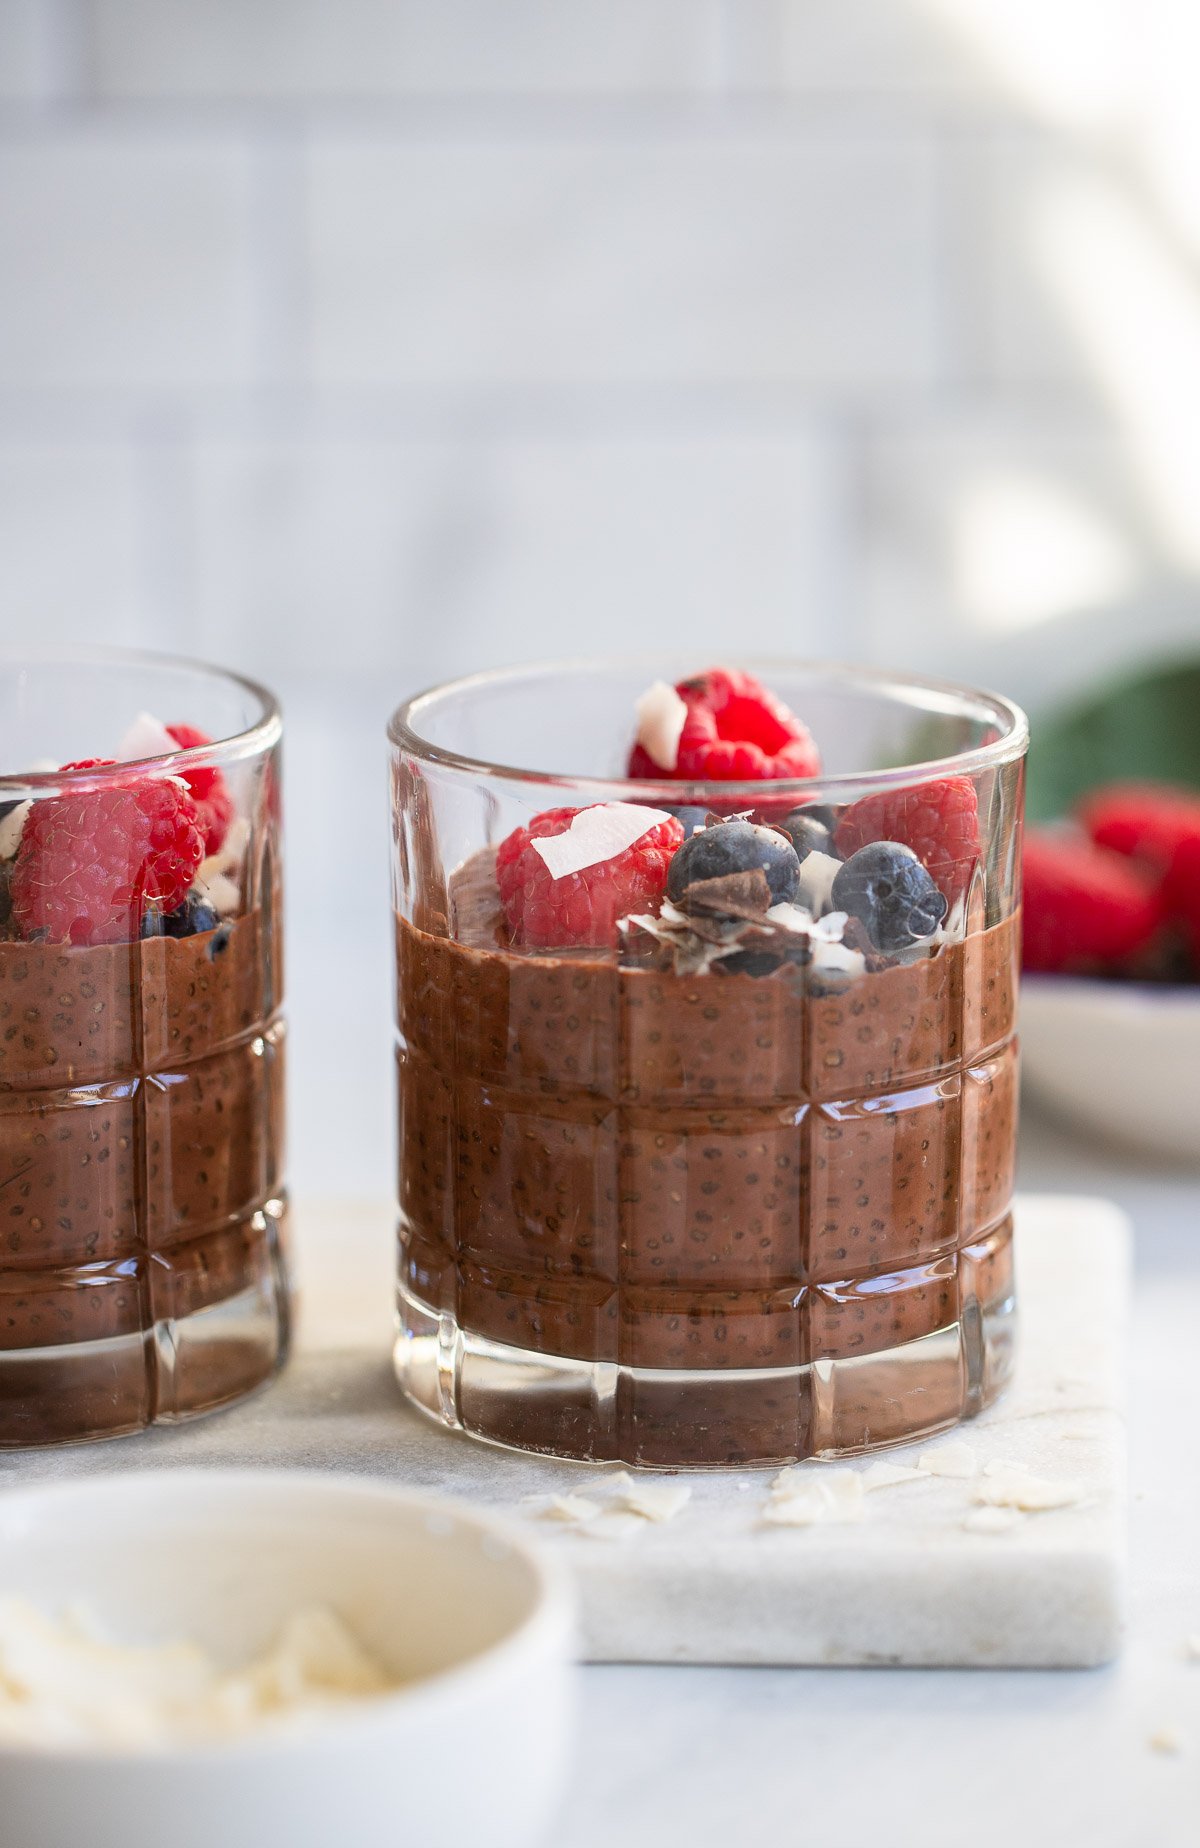 chocolate chia seed pudding in a glass garnished with fresh berries.